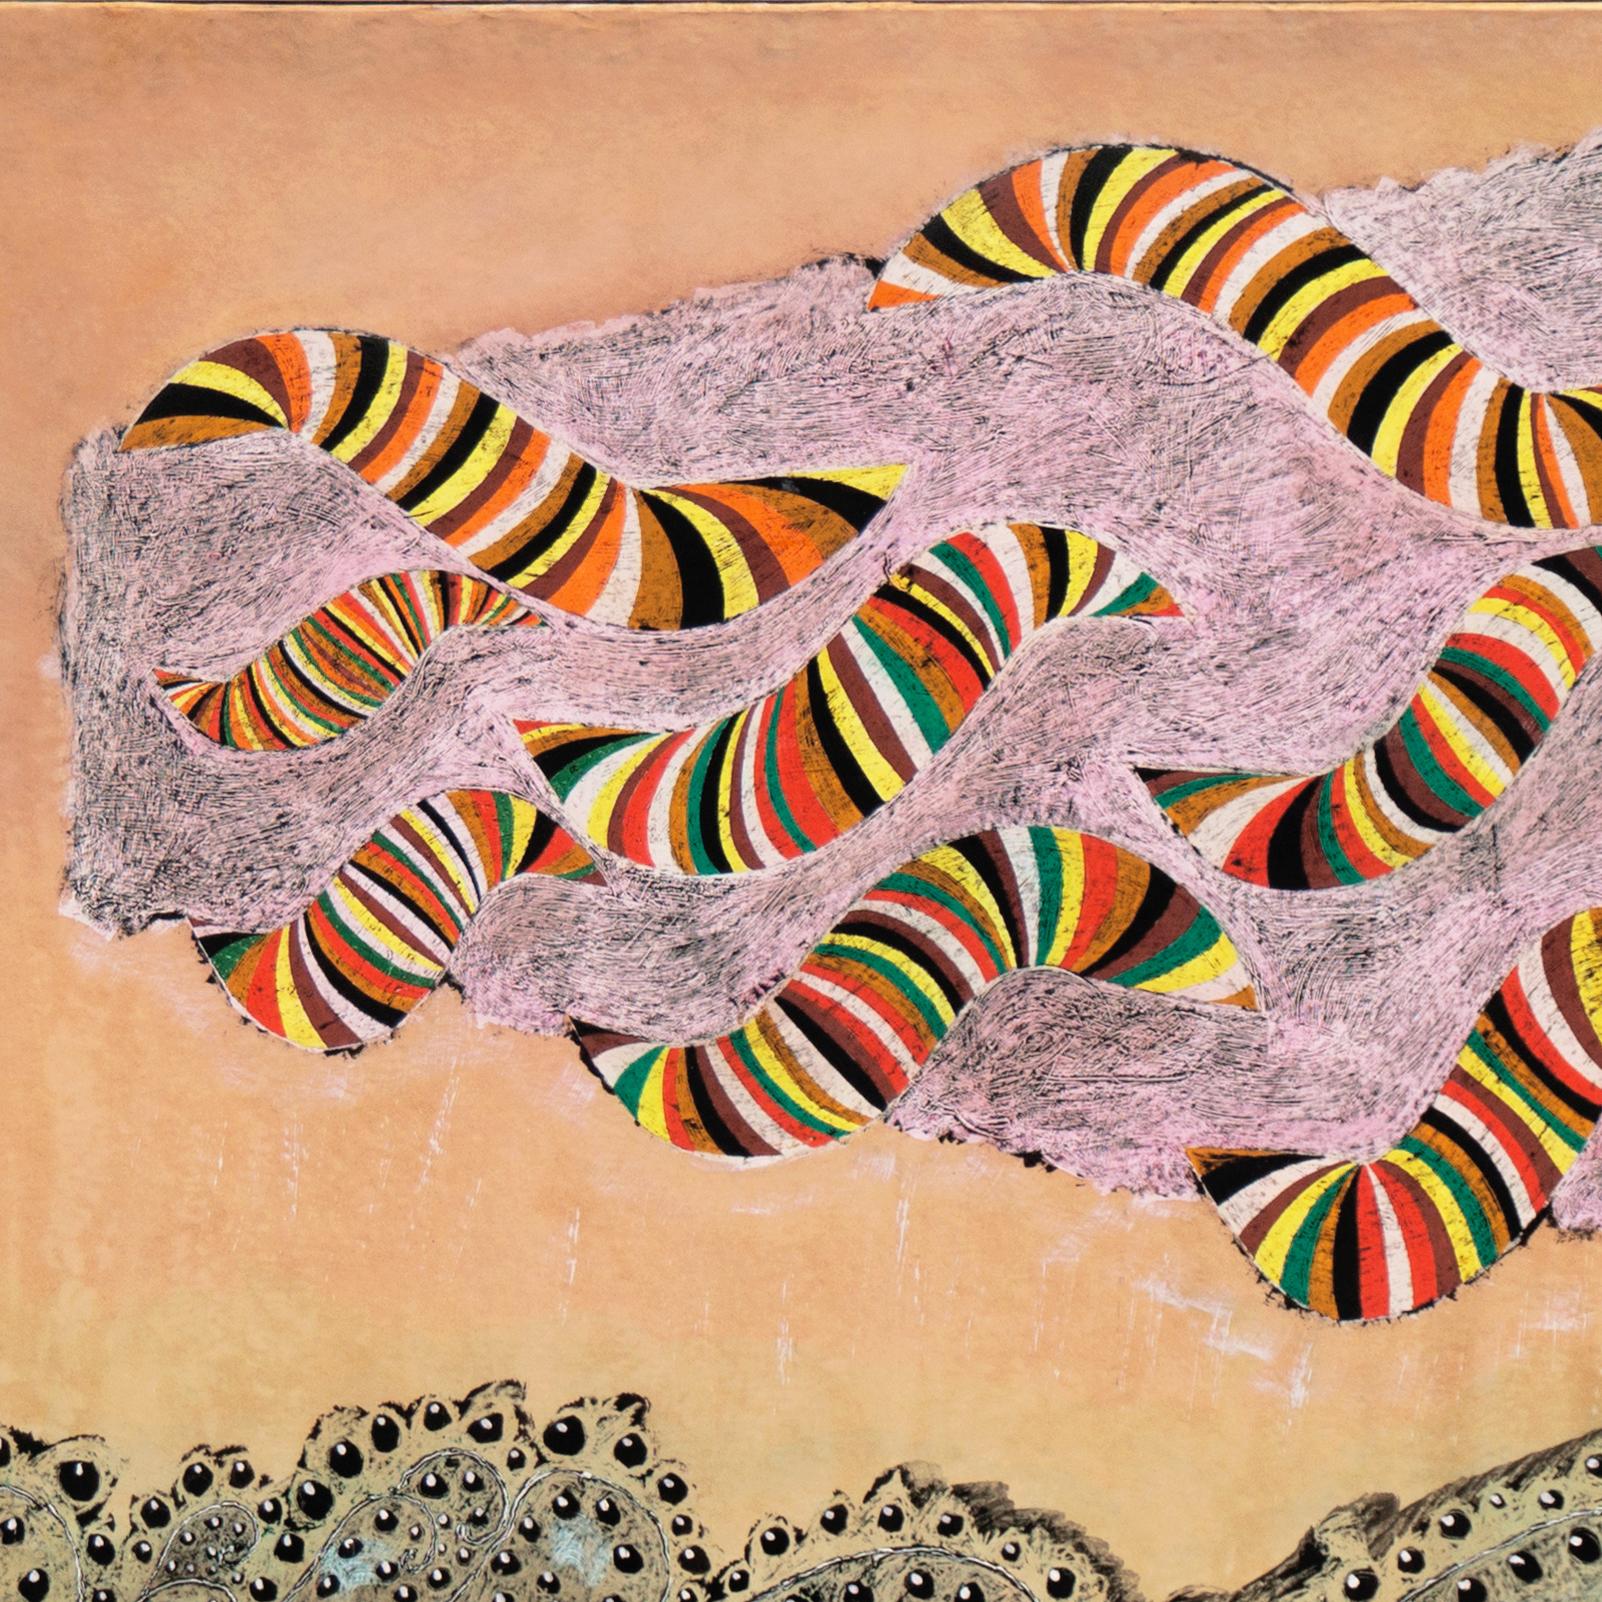 'Biomorphic Abstract', NYMoMA, Paris, XXXII Venice Biennale, MALI, Lima, Peru - Brown Abstract Painting by Emilio Rodríguez Larraín